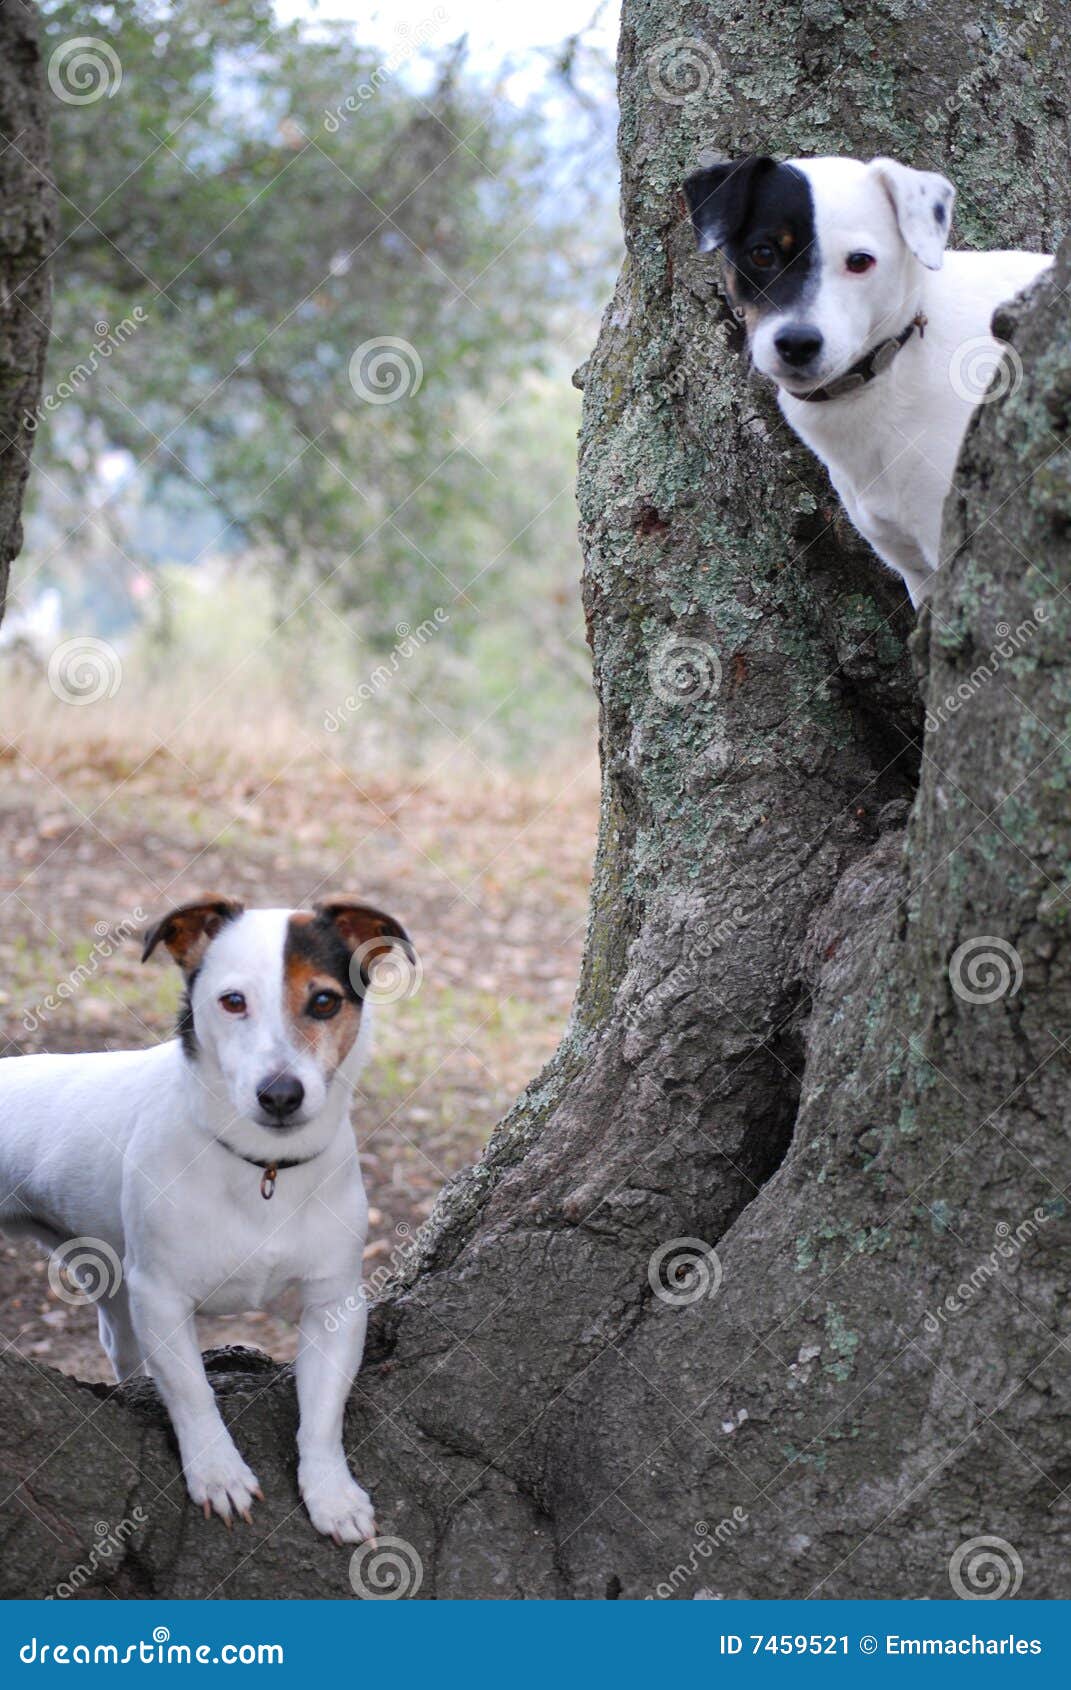 two dogs exploring in nature